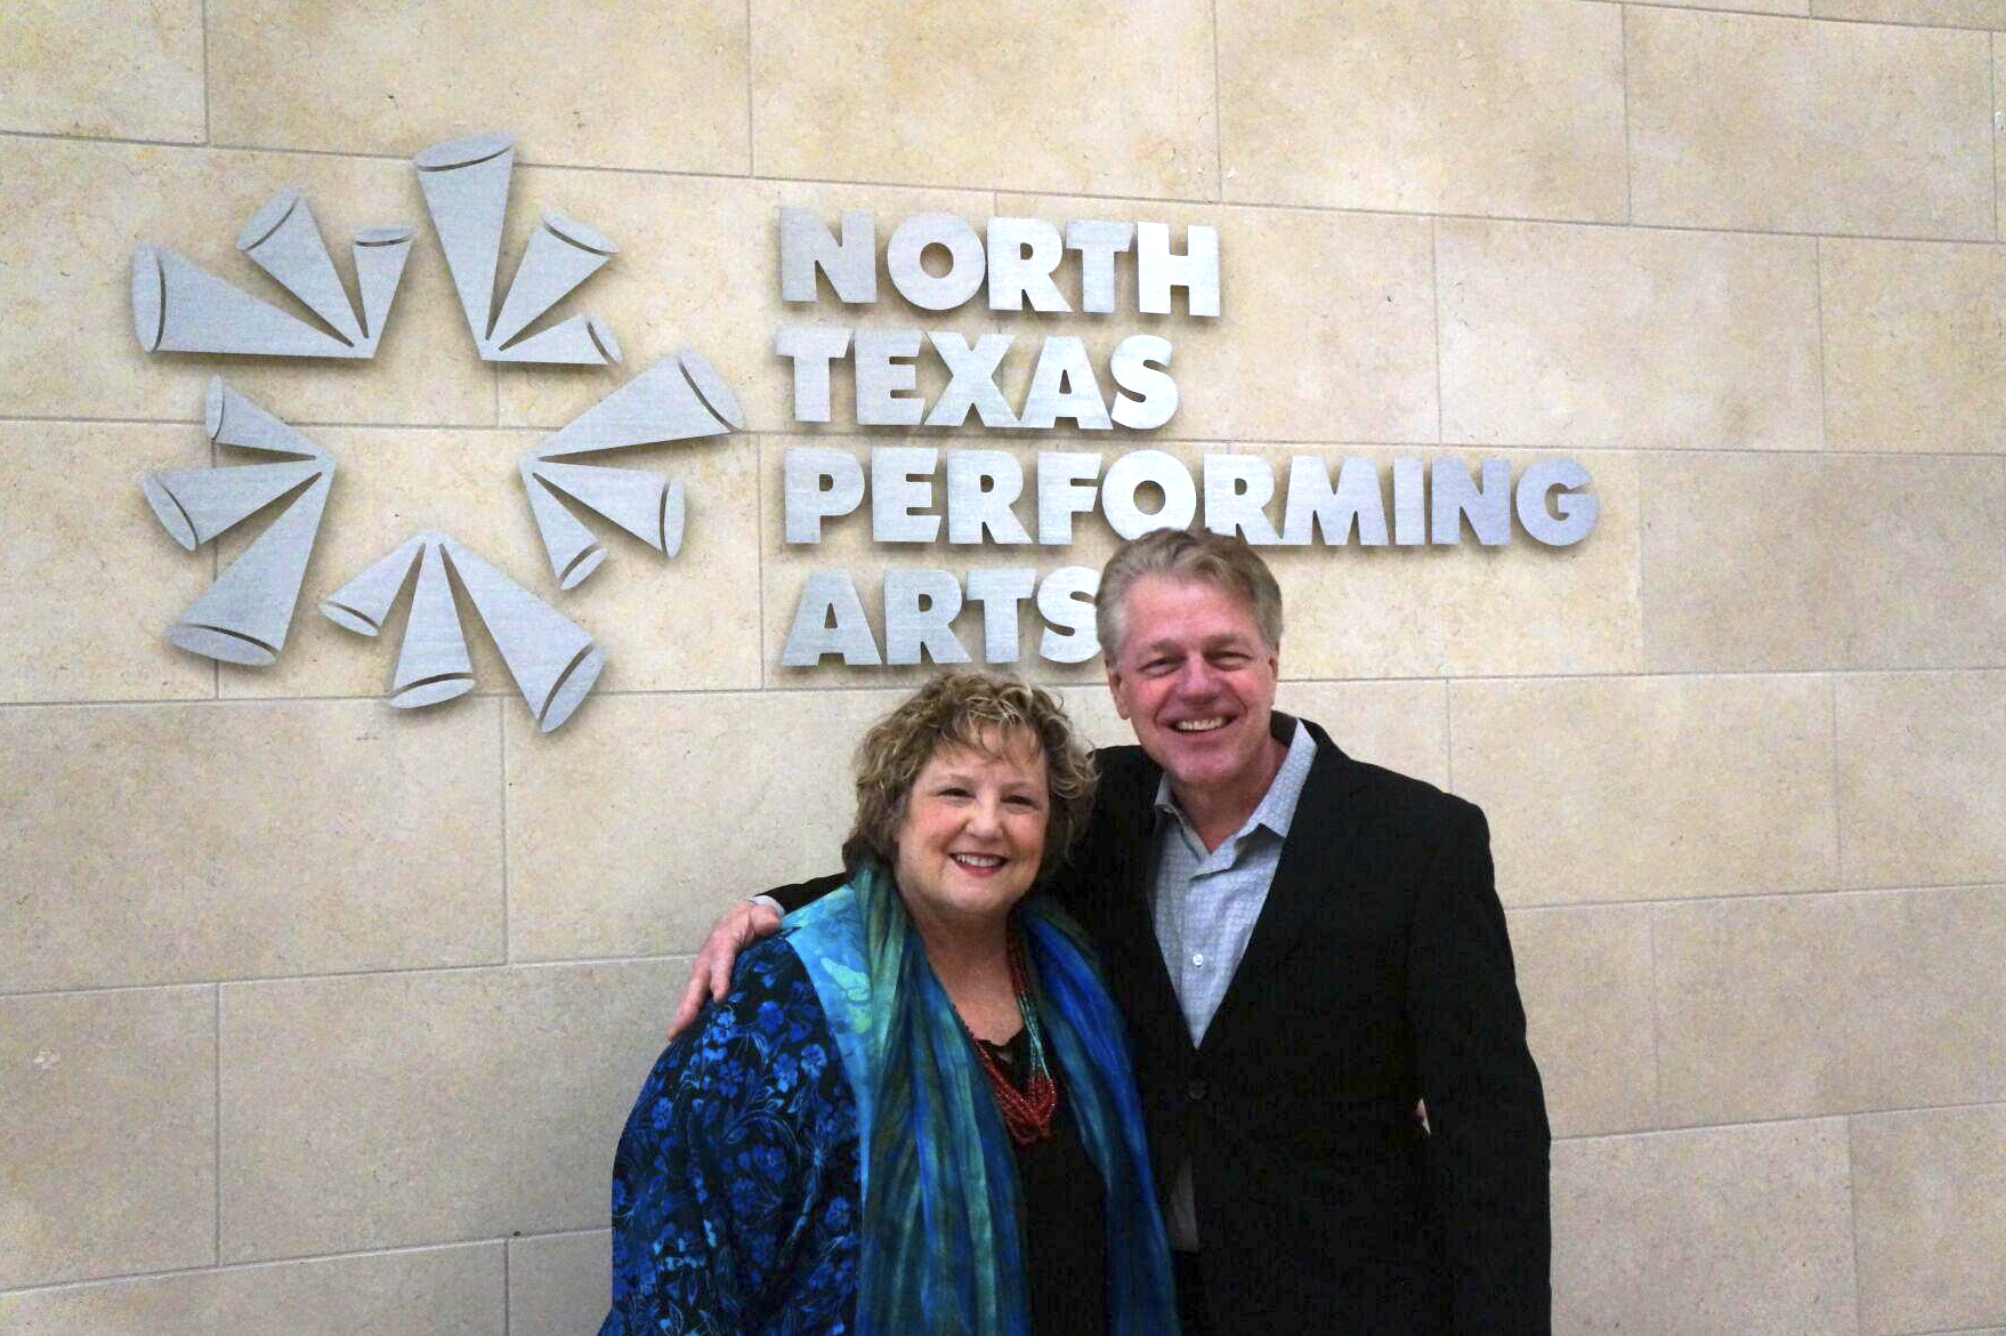 Sara Akers and Darrell Rodenbaugh stand in front of North Texas Performing Arts sign